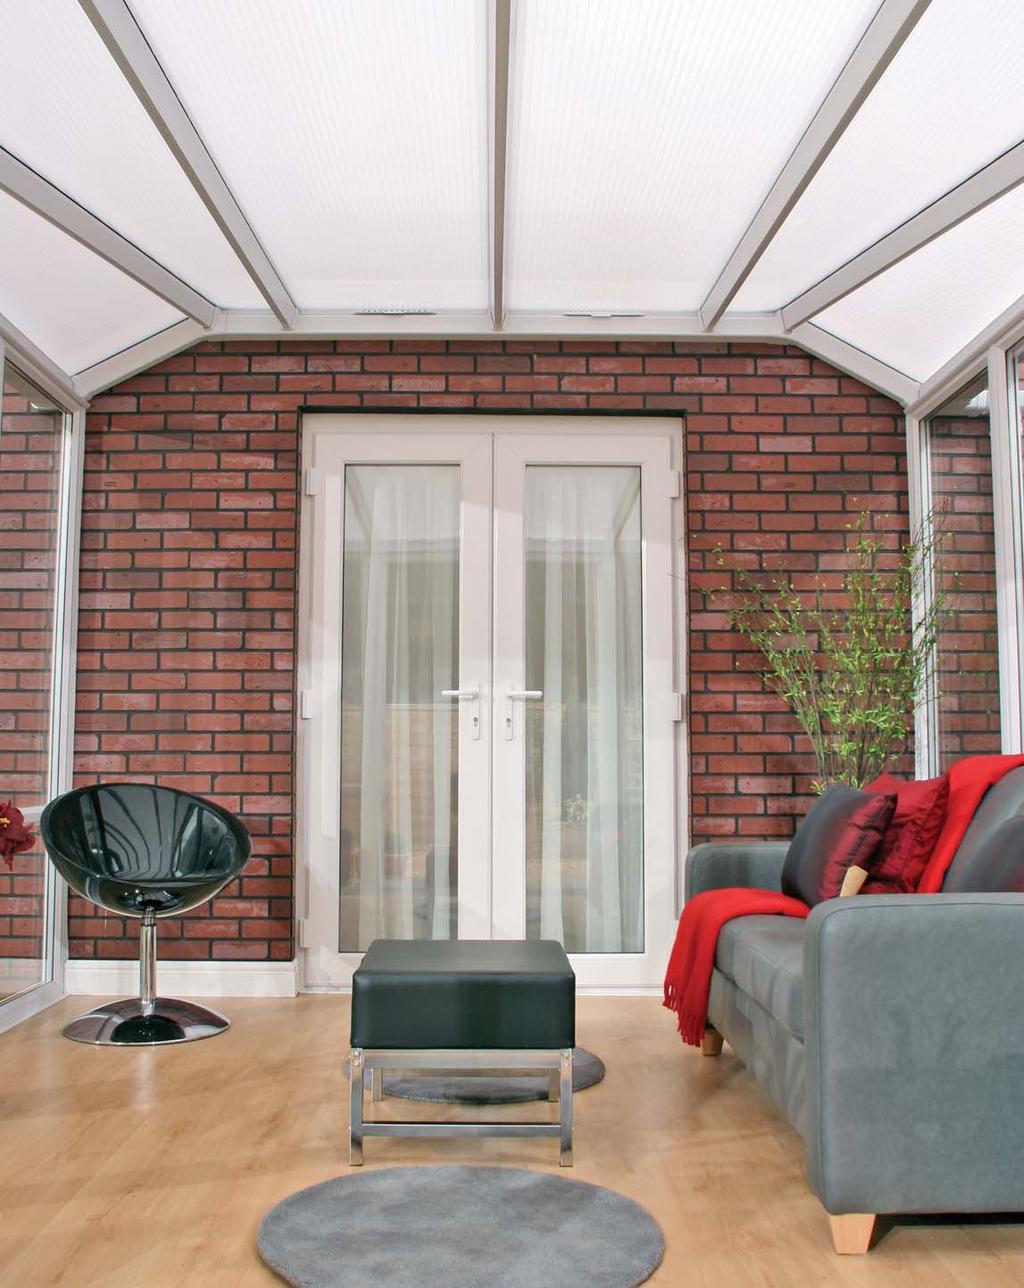 Also new to the fold is Uzone Elevation Plus with its unique hipped wings it creates a more light and airy feel to the lean-to.